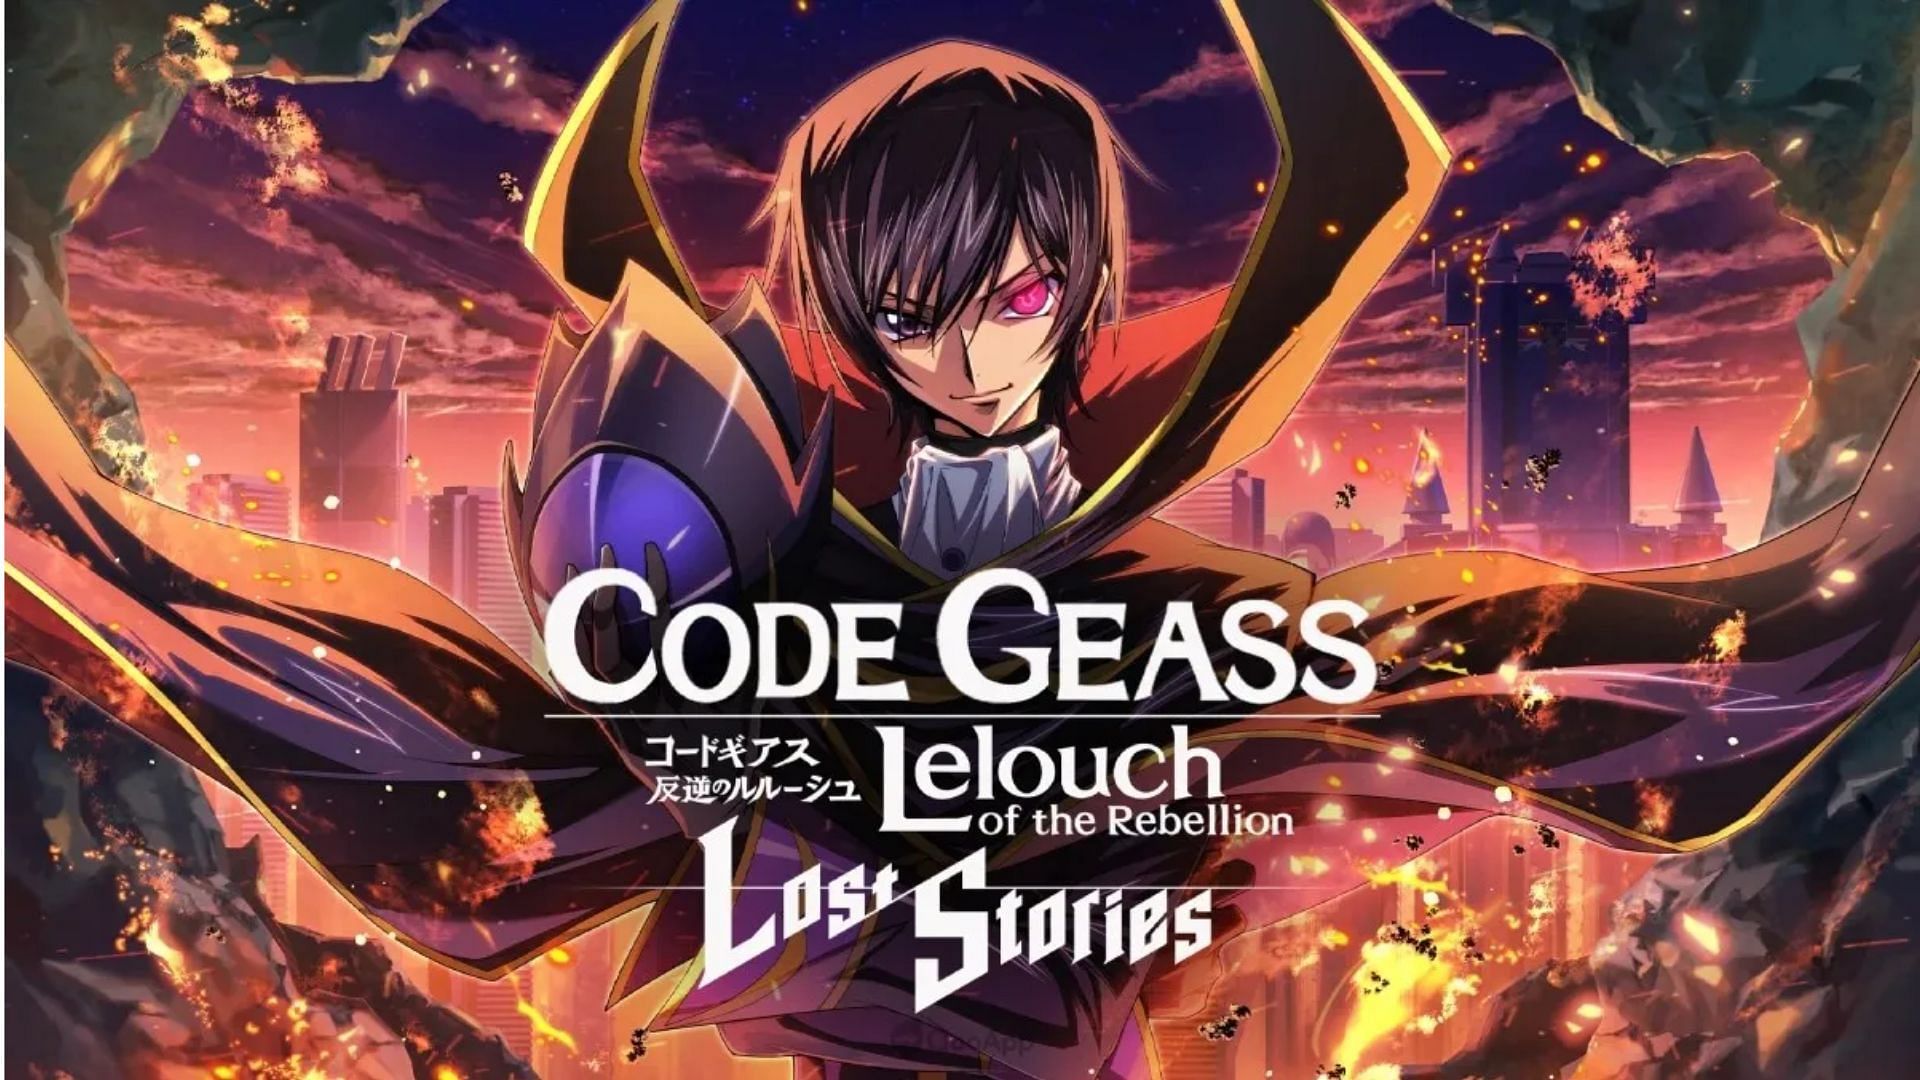 Code Geass Social Game Restarts Development, Launches for PC, Smartphones  in Spring 2022 - News - Anime News Network